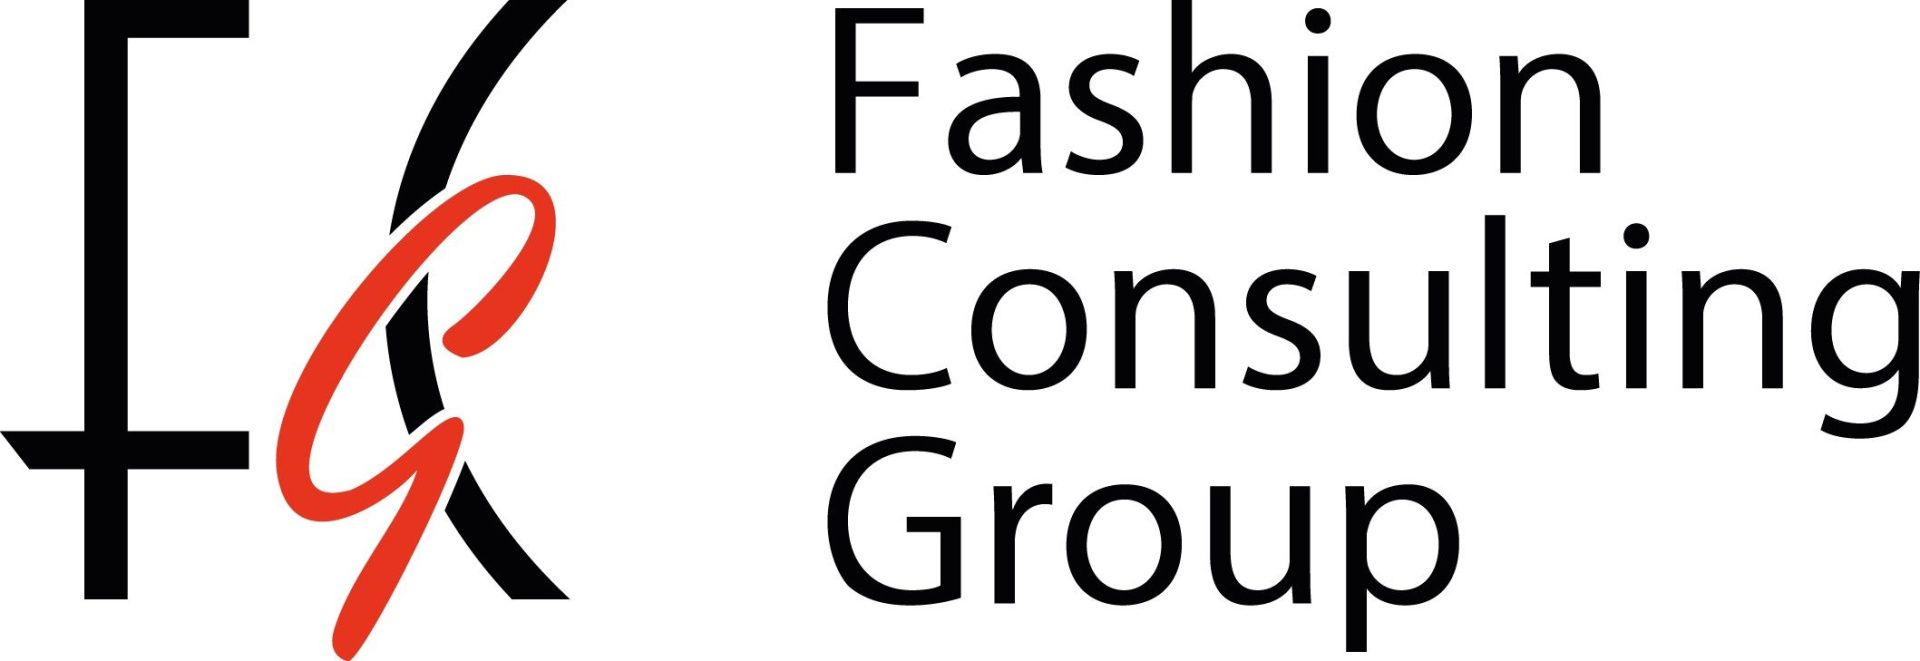 Upcoming trainings by Fashion Consulting Group